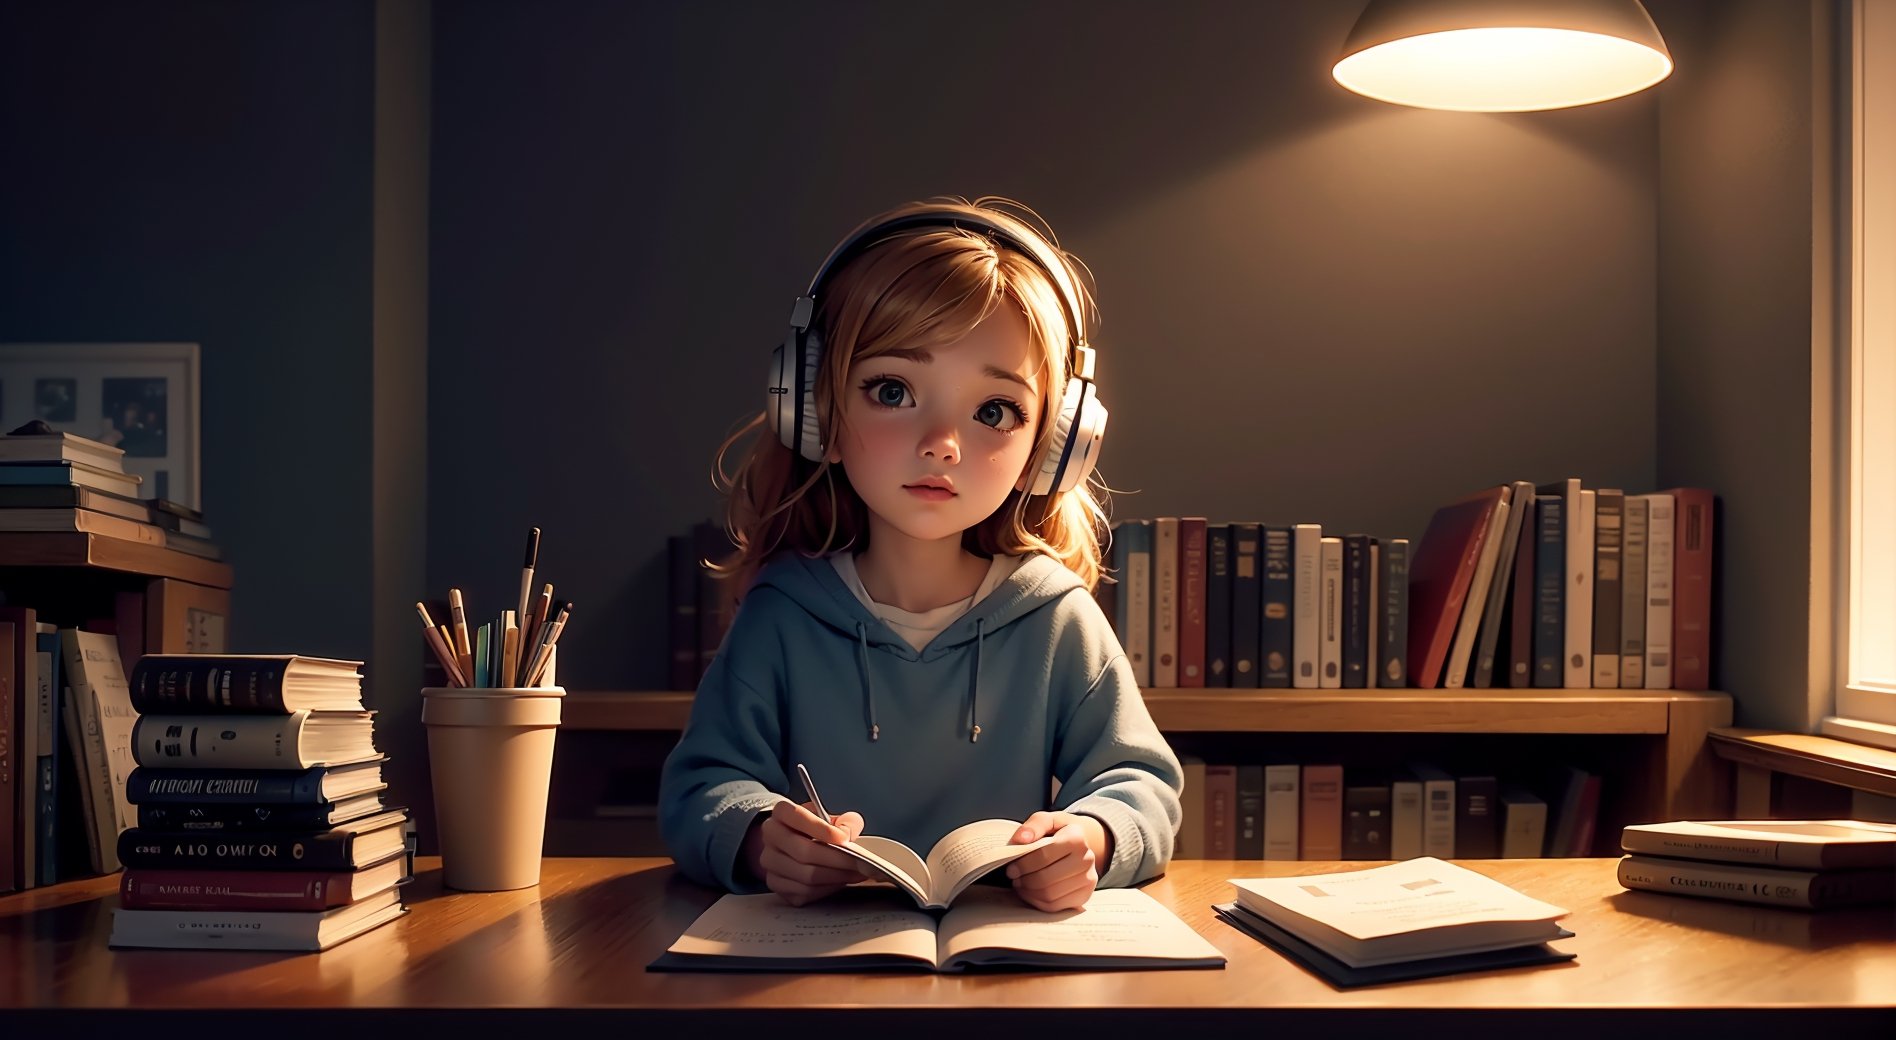 fine art, digital painting, amazing sky, pixar style,
.
25 years old girl, reading book, Wear headphones, aesthetic, digital illustration, soft colors, minimalistic, cozy room, bookshelves, desk cluttered with papers, cup of coffee, potted plant, melancholic atmosphere, night lights, side view,
.
cute, storybook detailed llustration, cinematic, ultra highly detailed, tiny details, beautiful details, vibrant colors